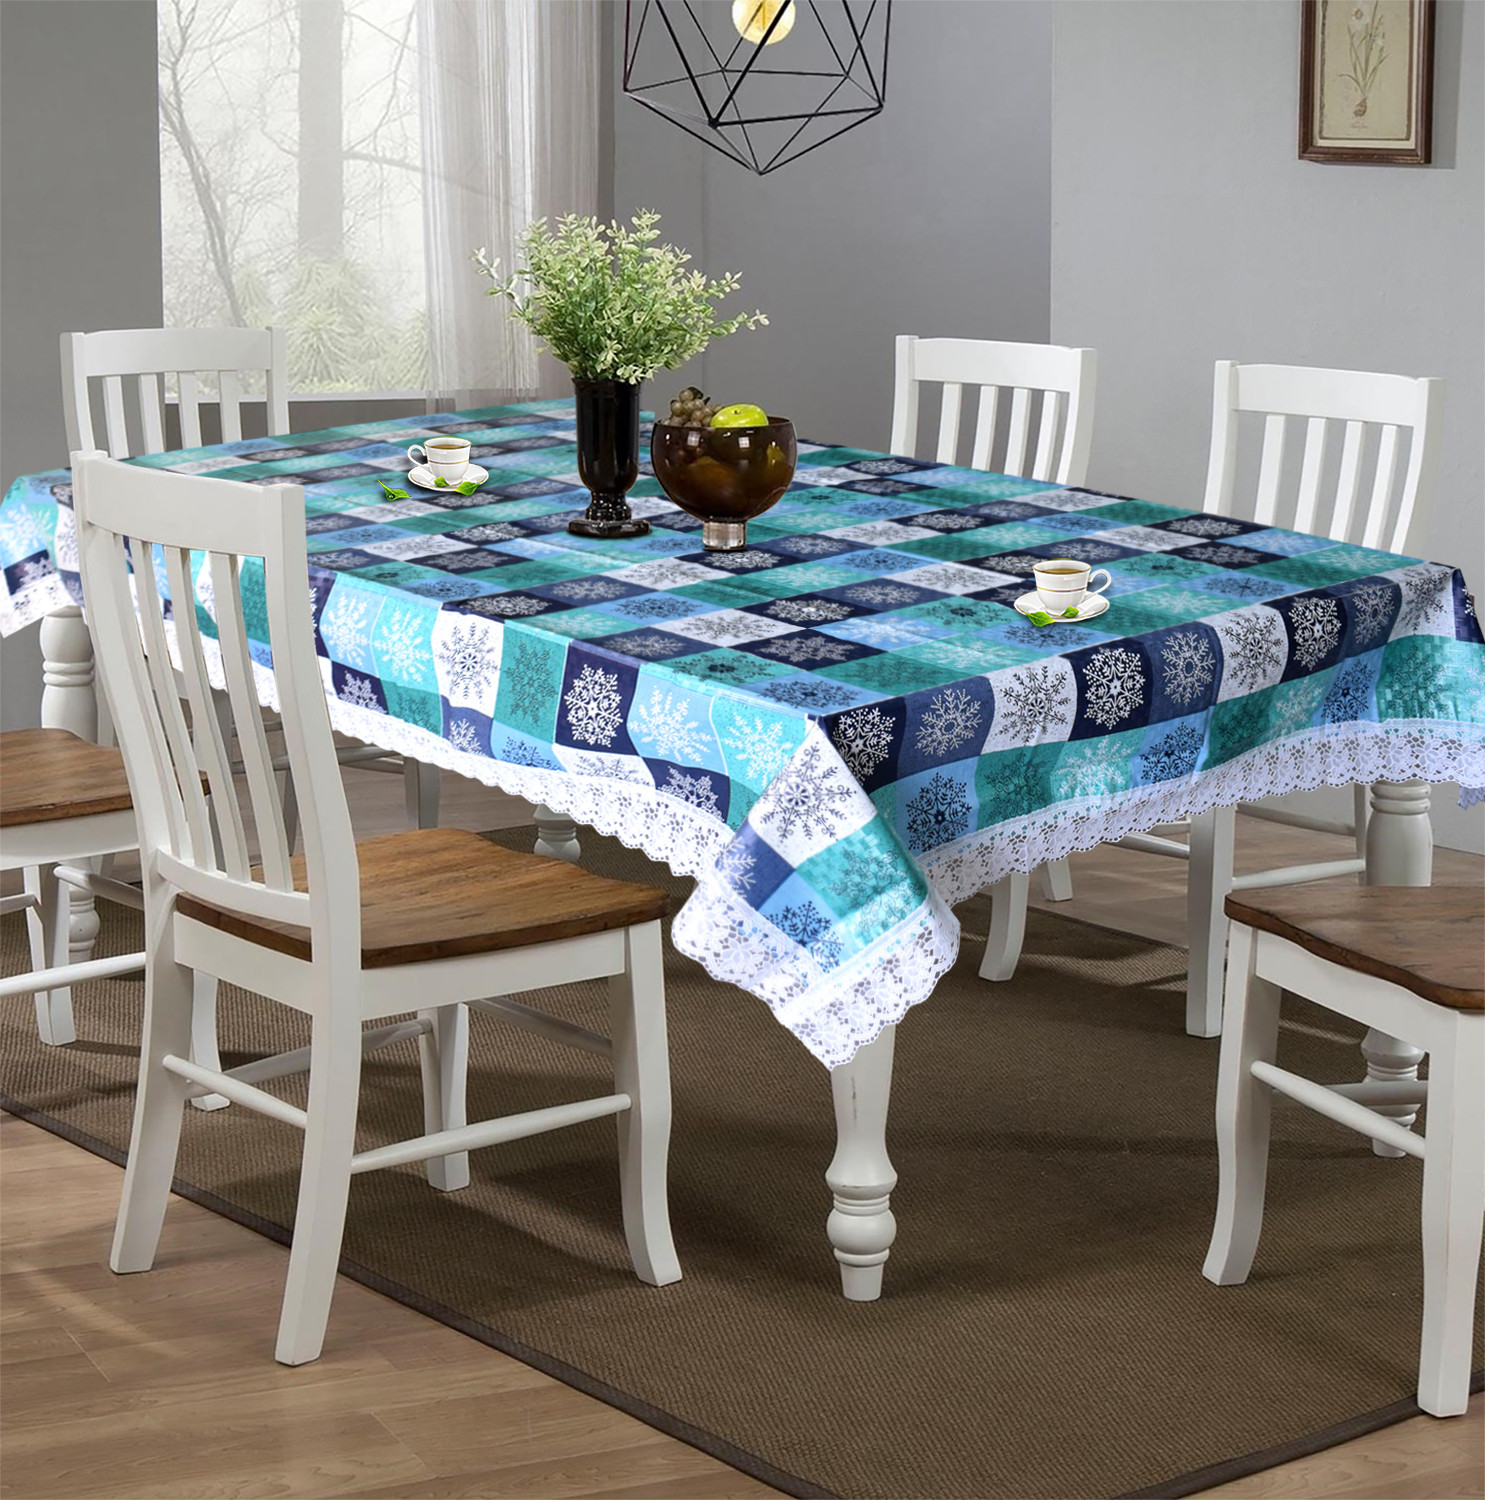 Kuber Industries Multicheck Printed PVC 6 Seater Dinning Table Cover, Protector With White Lace Border, 60